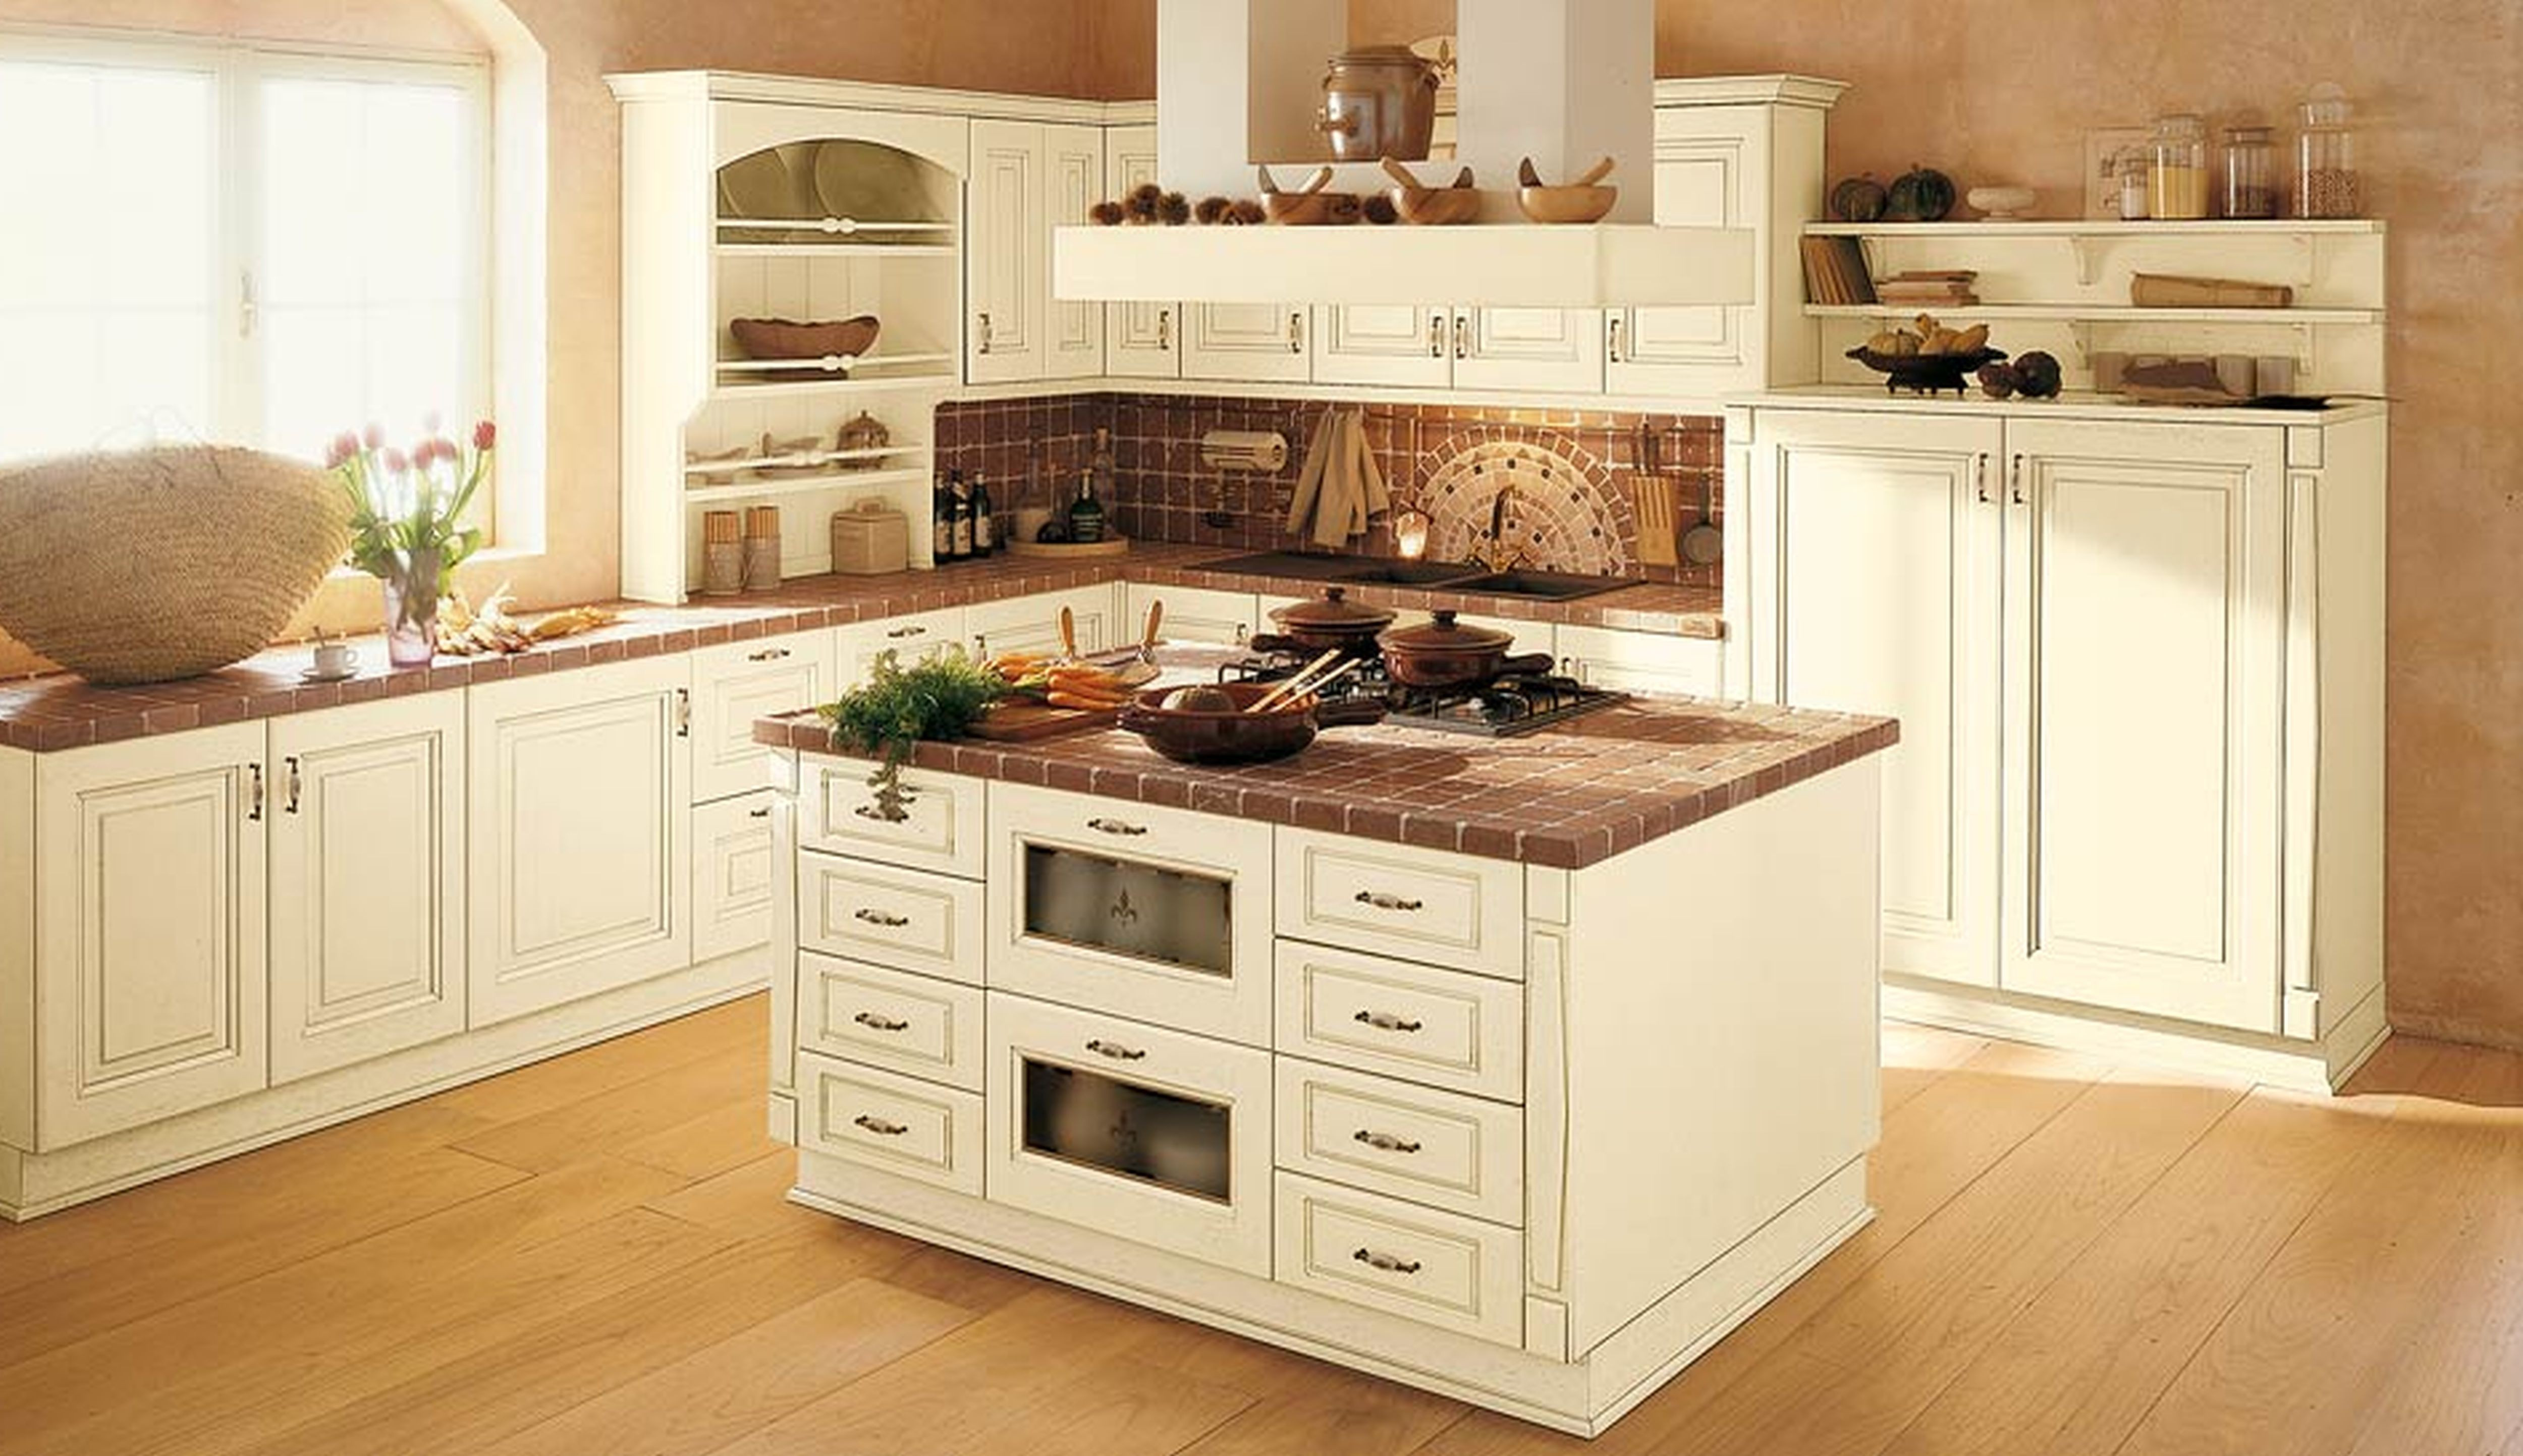 kitchen hardwood floor ideas of the wood maker page 6 wood wallpaper with kitchen remodeling ideas inspirationa kitchen designing 0d inspirations of wood floor designs